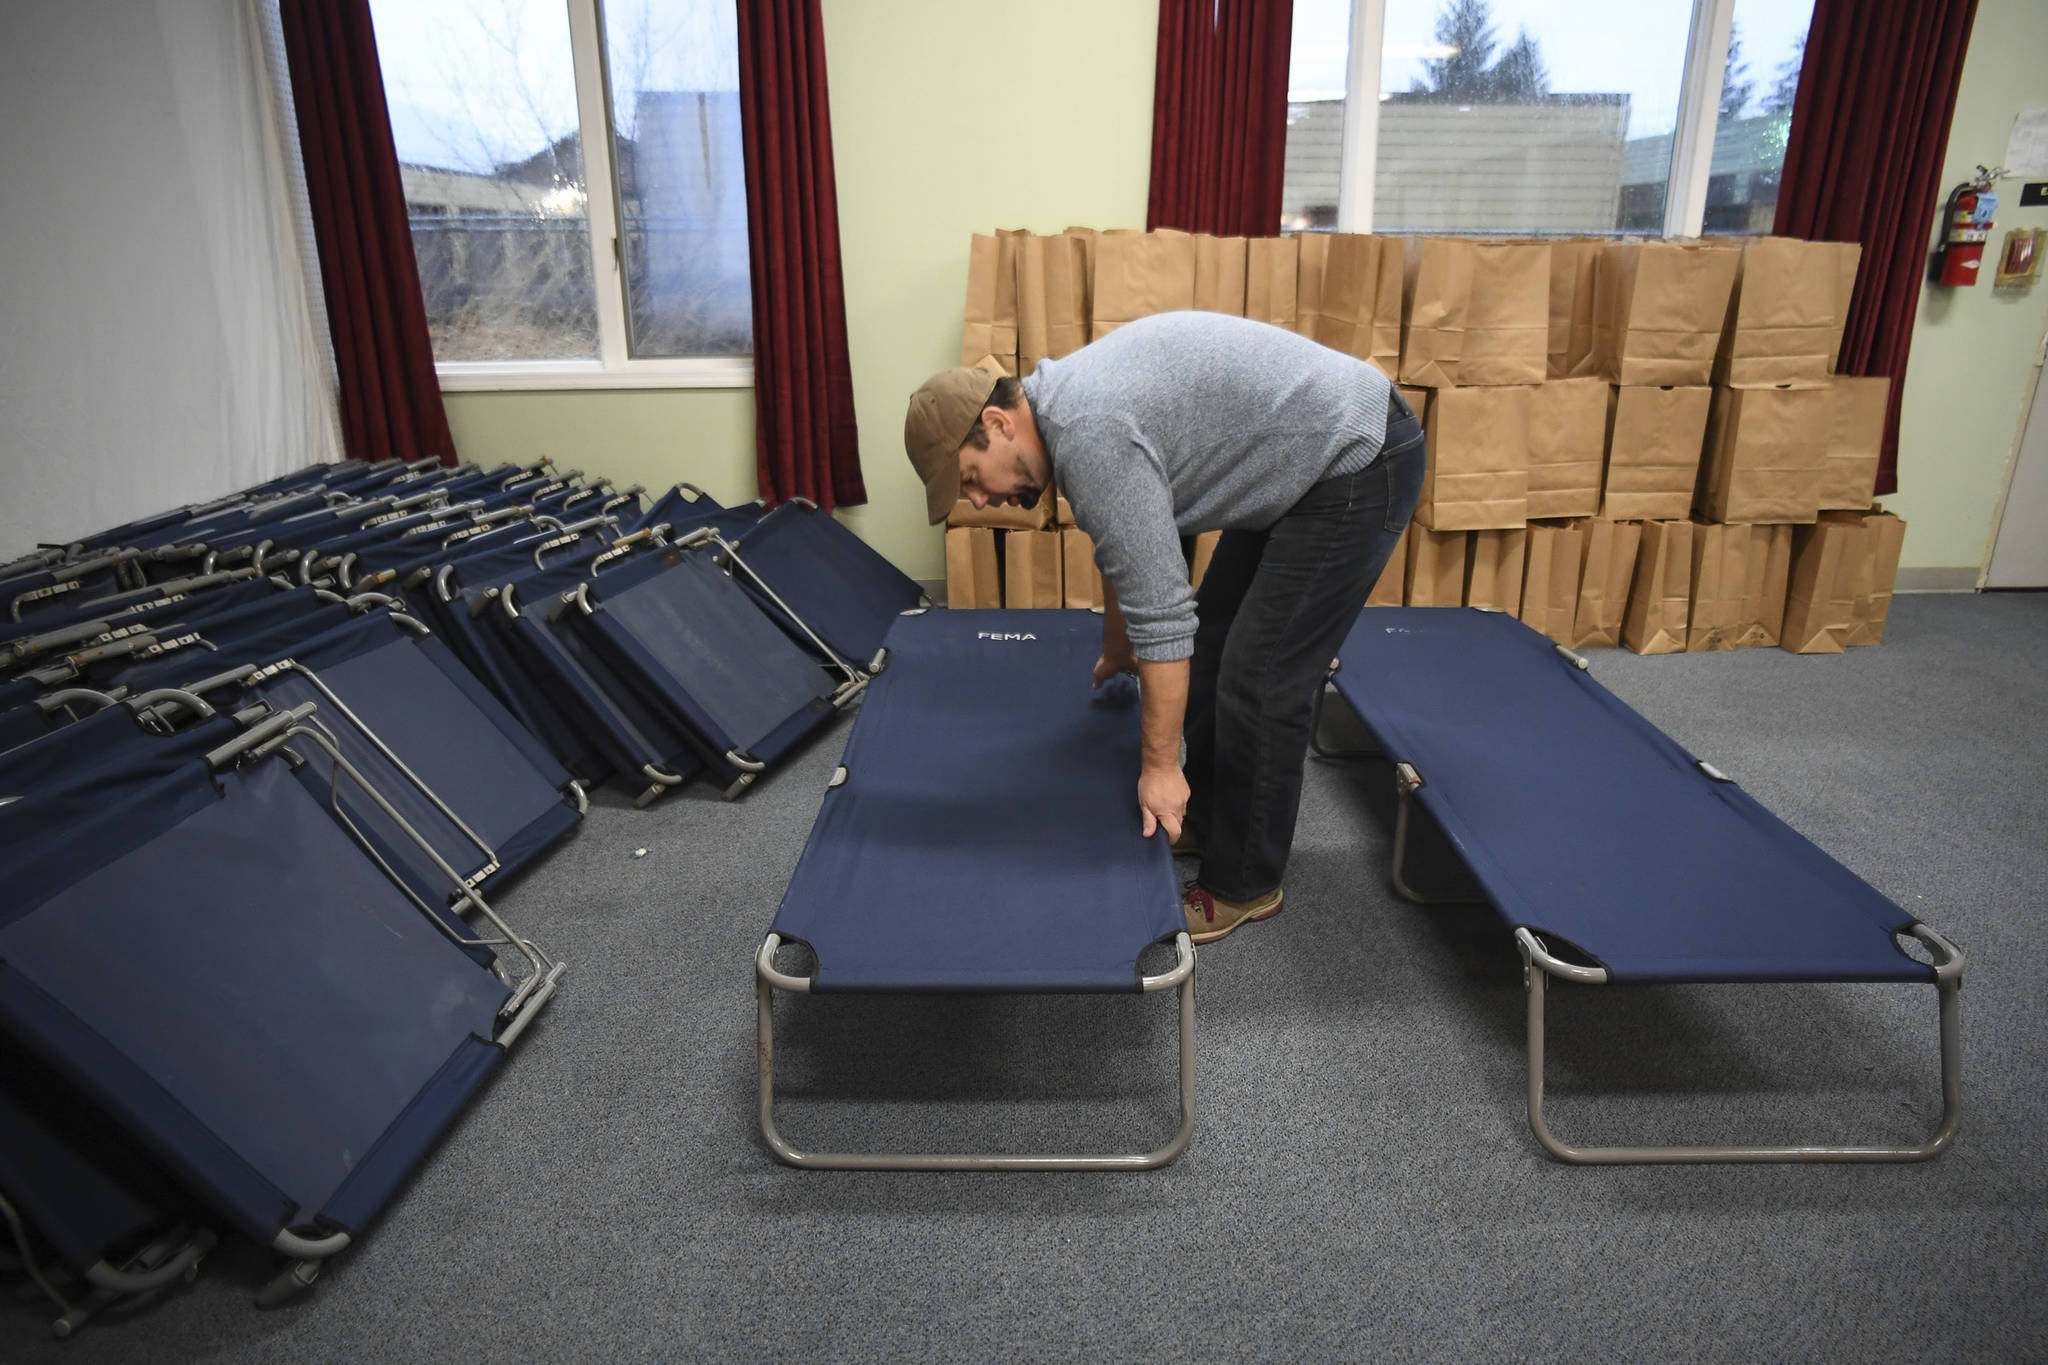 Cold Weather Emergency Shelter Manager Richard Cole set up cots at St. Vincent de Paul on Wednesday, Nov. 20, 2019. The shelter is expected to open Saturday. (Michael Penn | Juneau Empire)